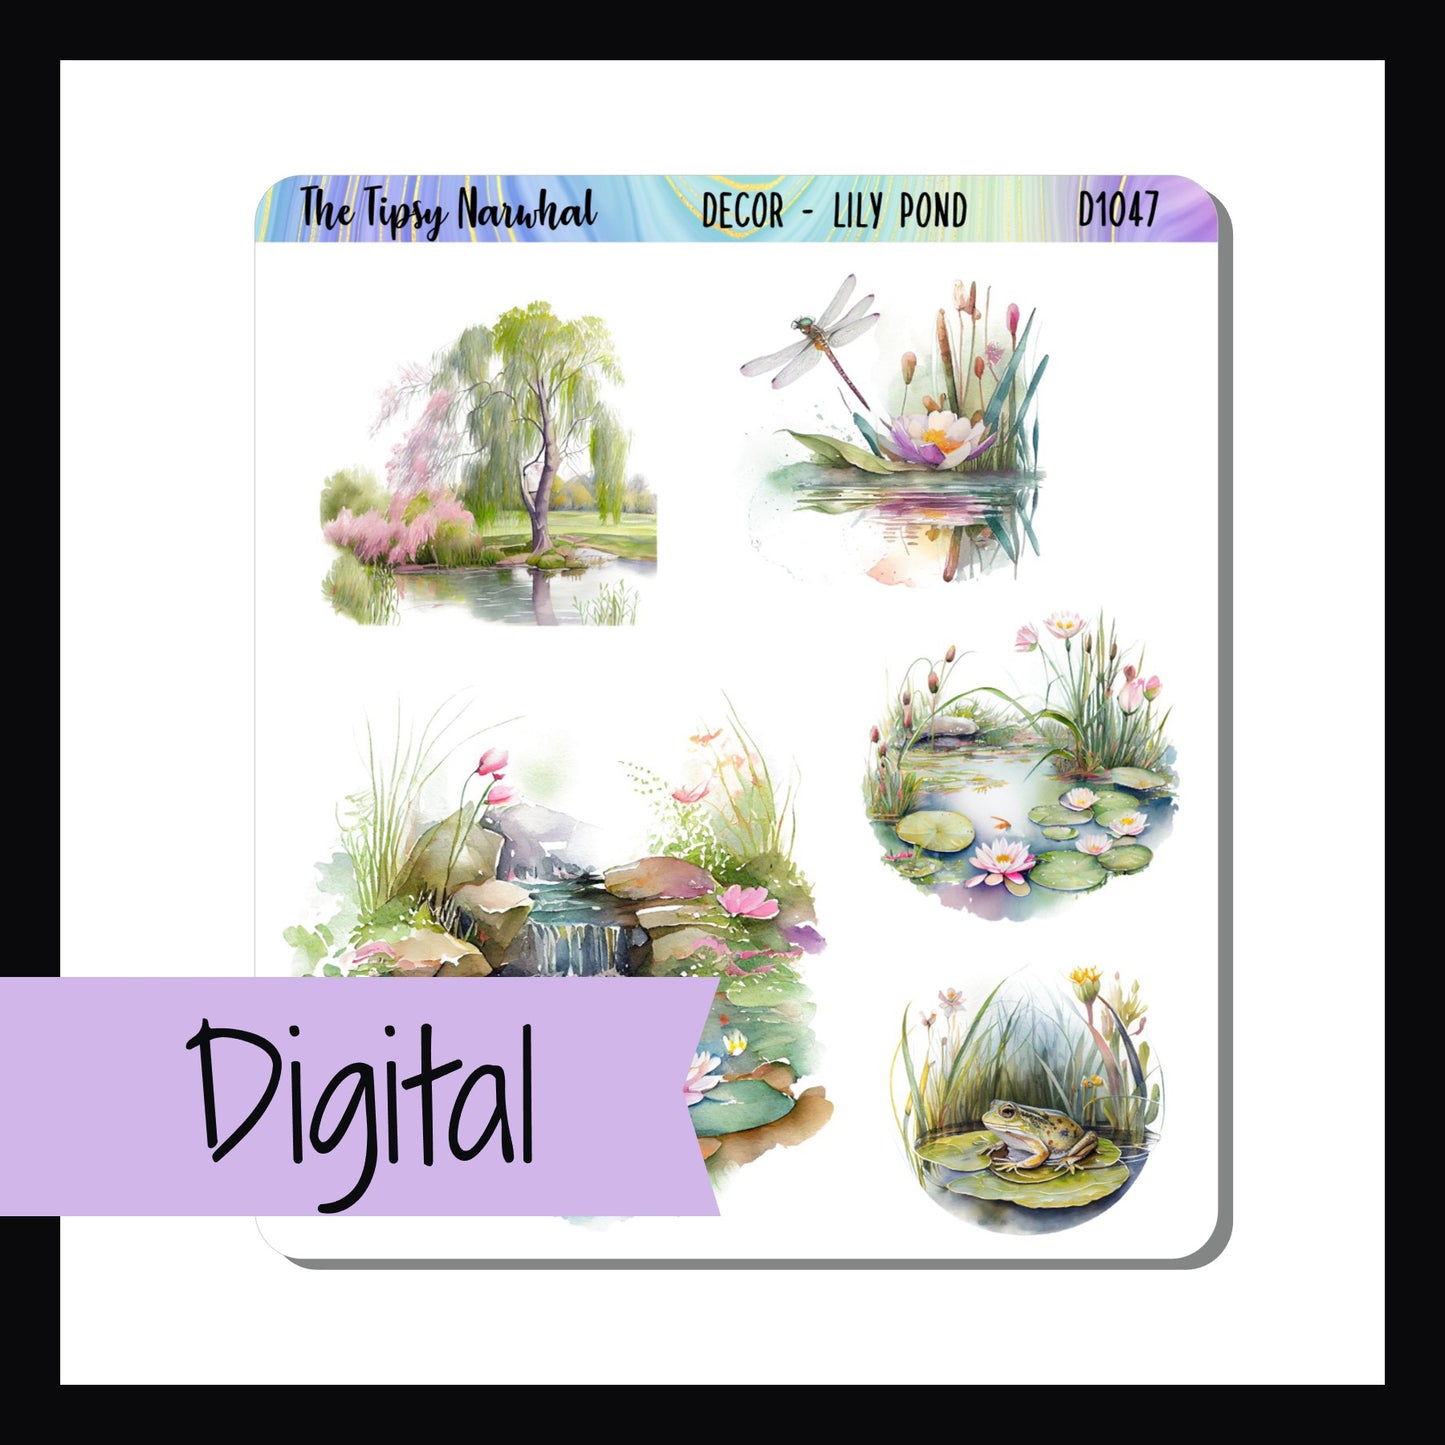 The Digital Lily Pond Decor Sheet is the digital/printable version of the Lily Pond Decor Sheet.  The sheet features 5 stickers all depicting different views of a serene lily pond.